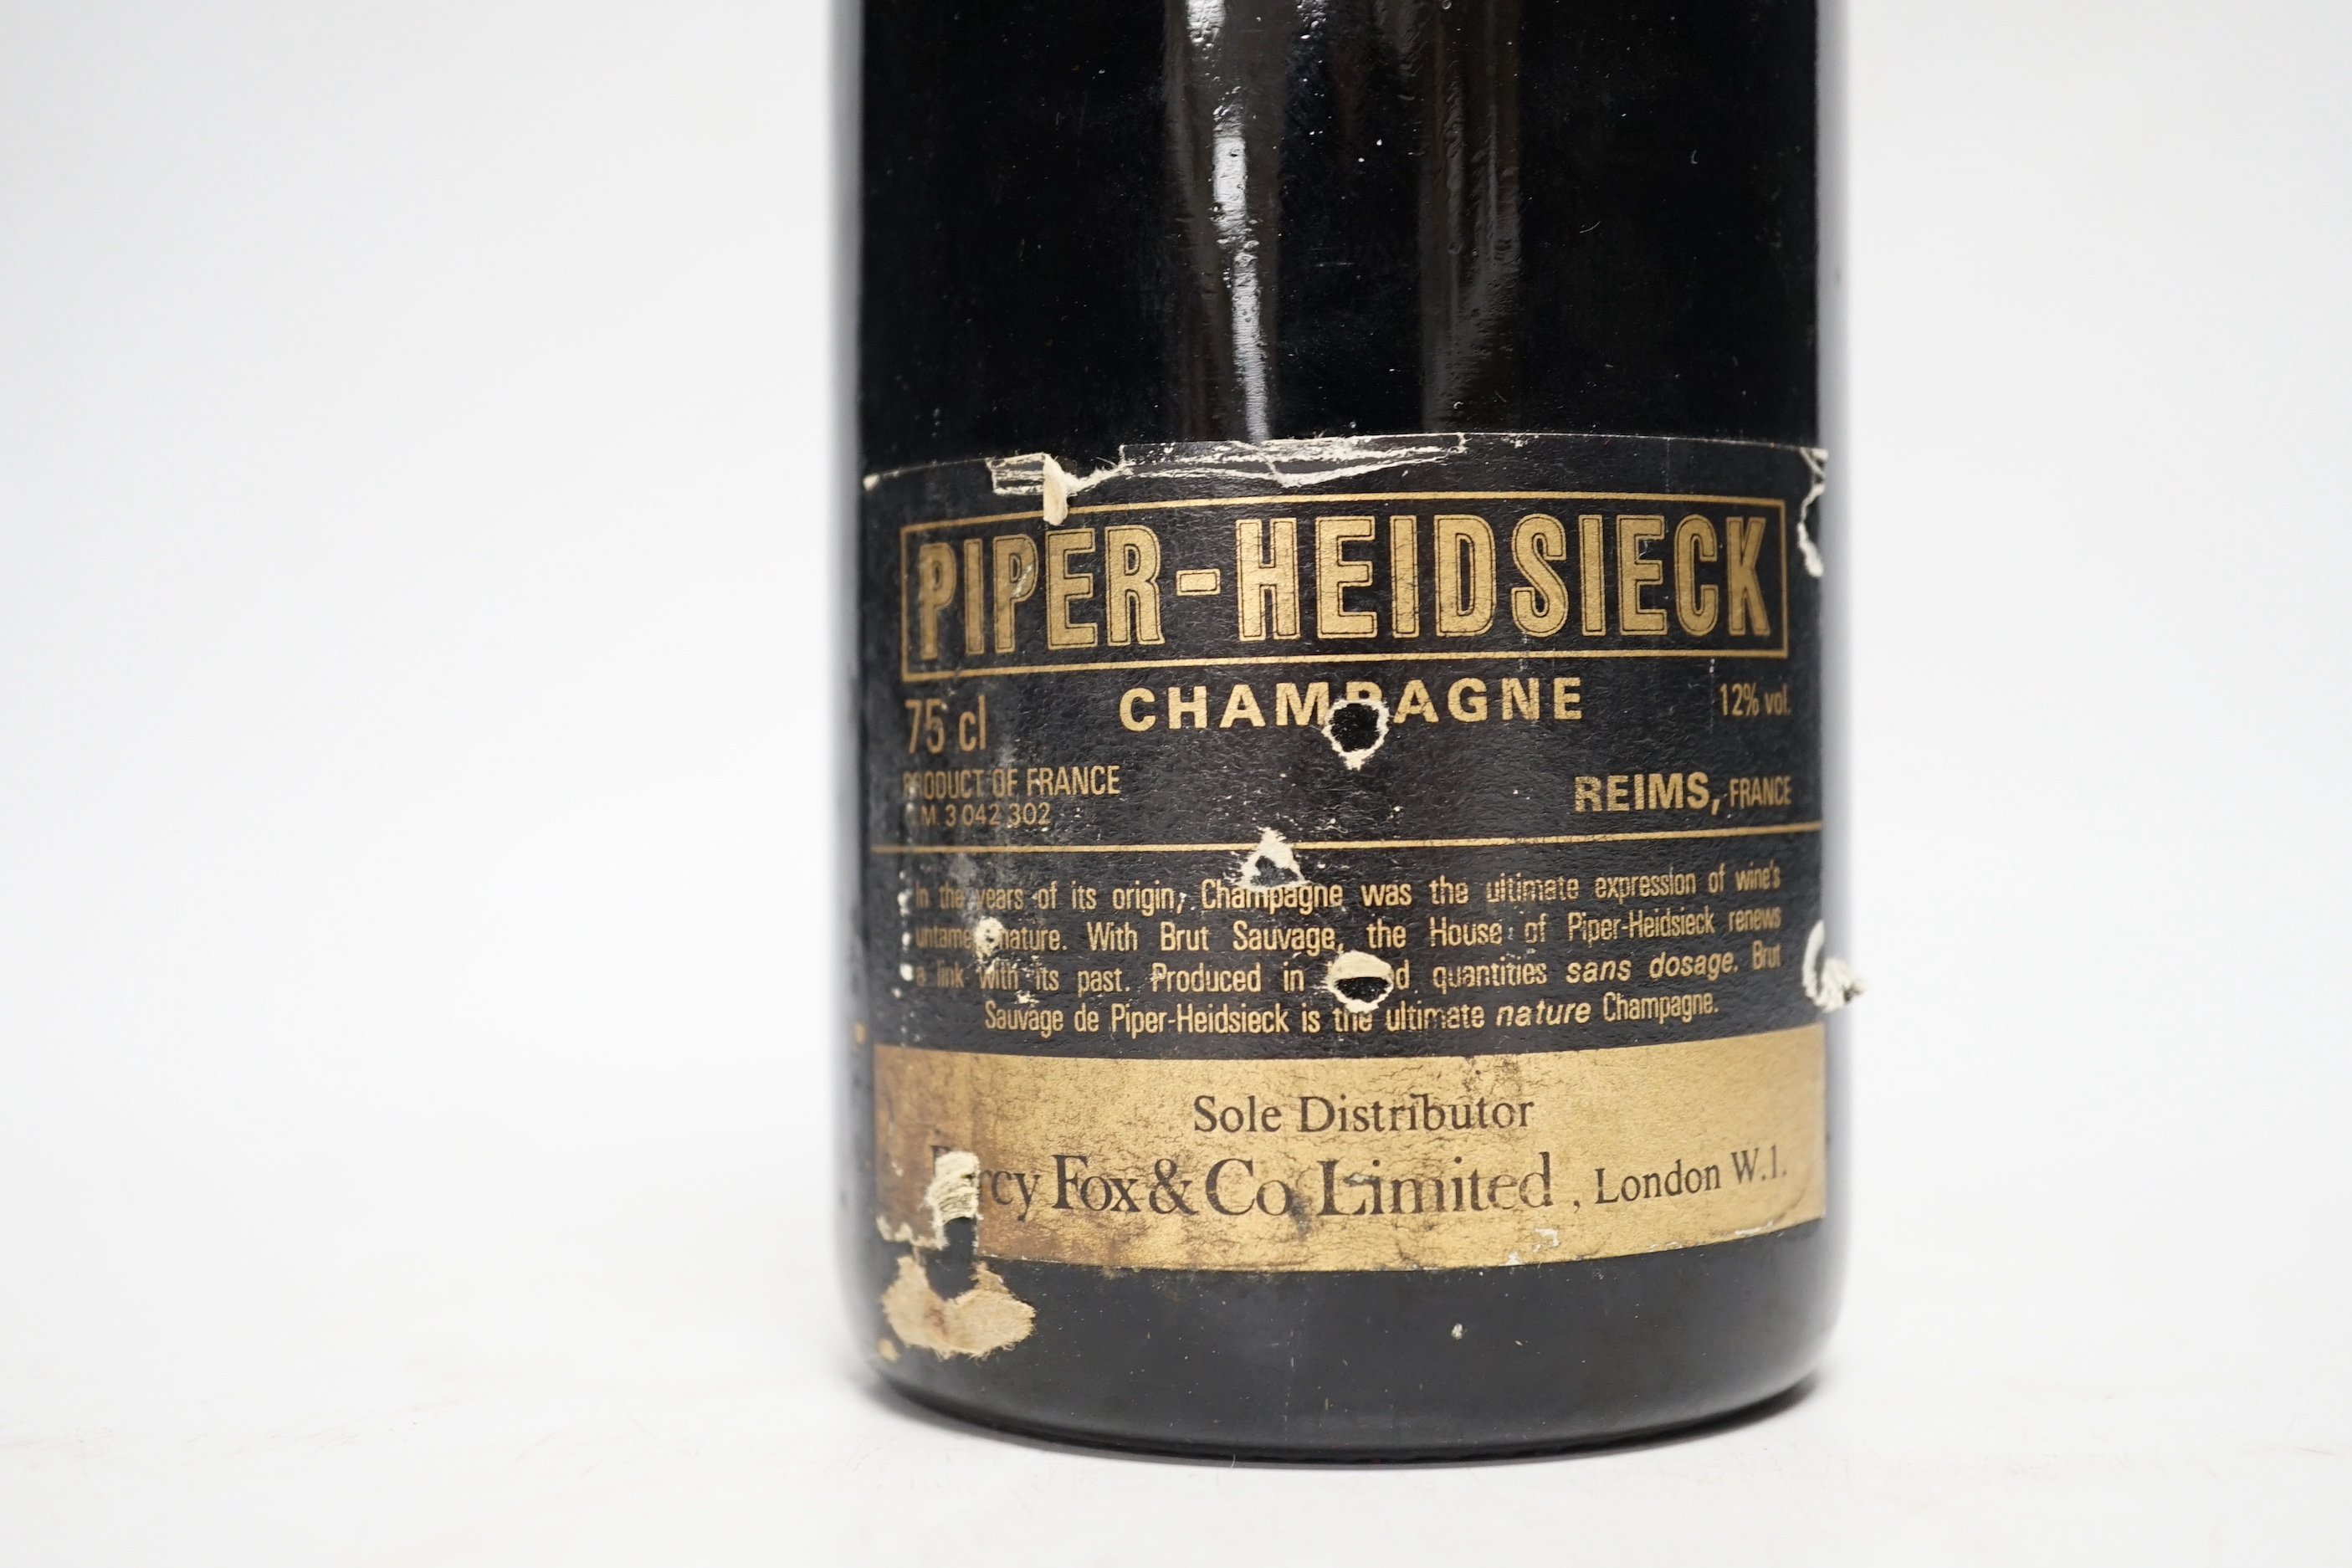 One bottle of Piper-Heidsieck Sauvage champagne, 1979